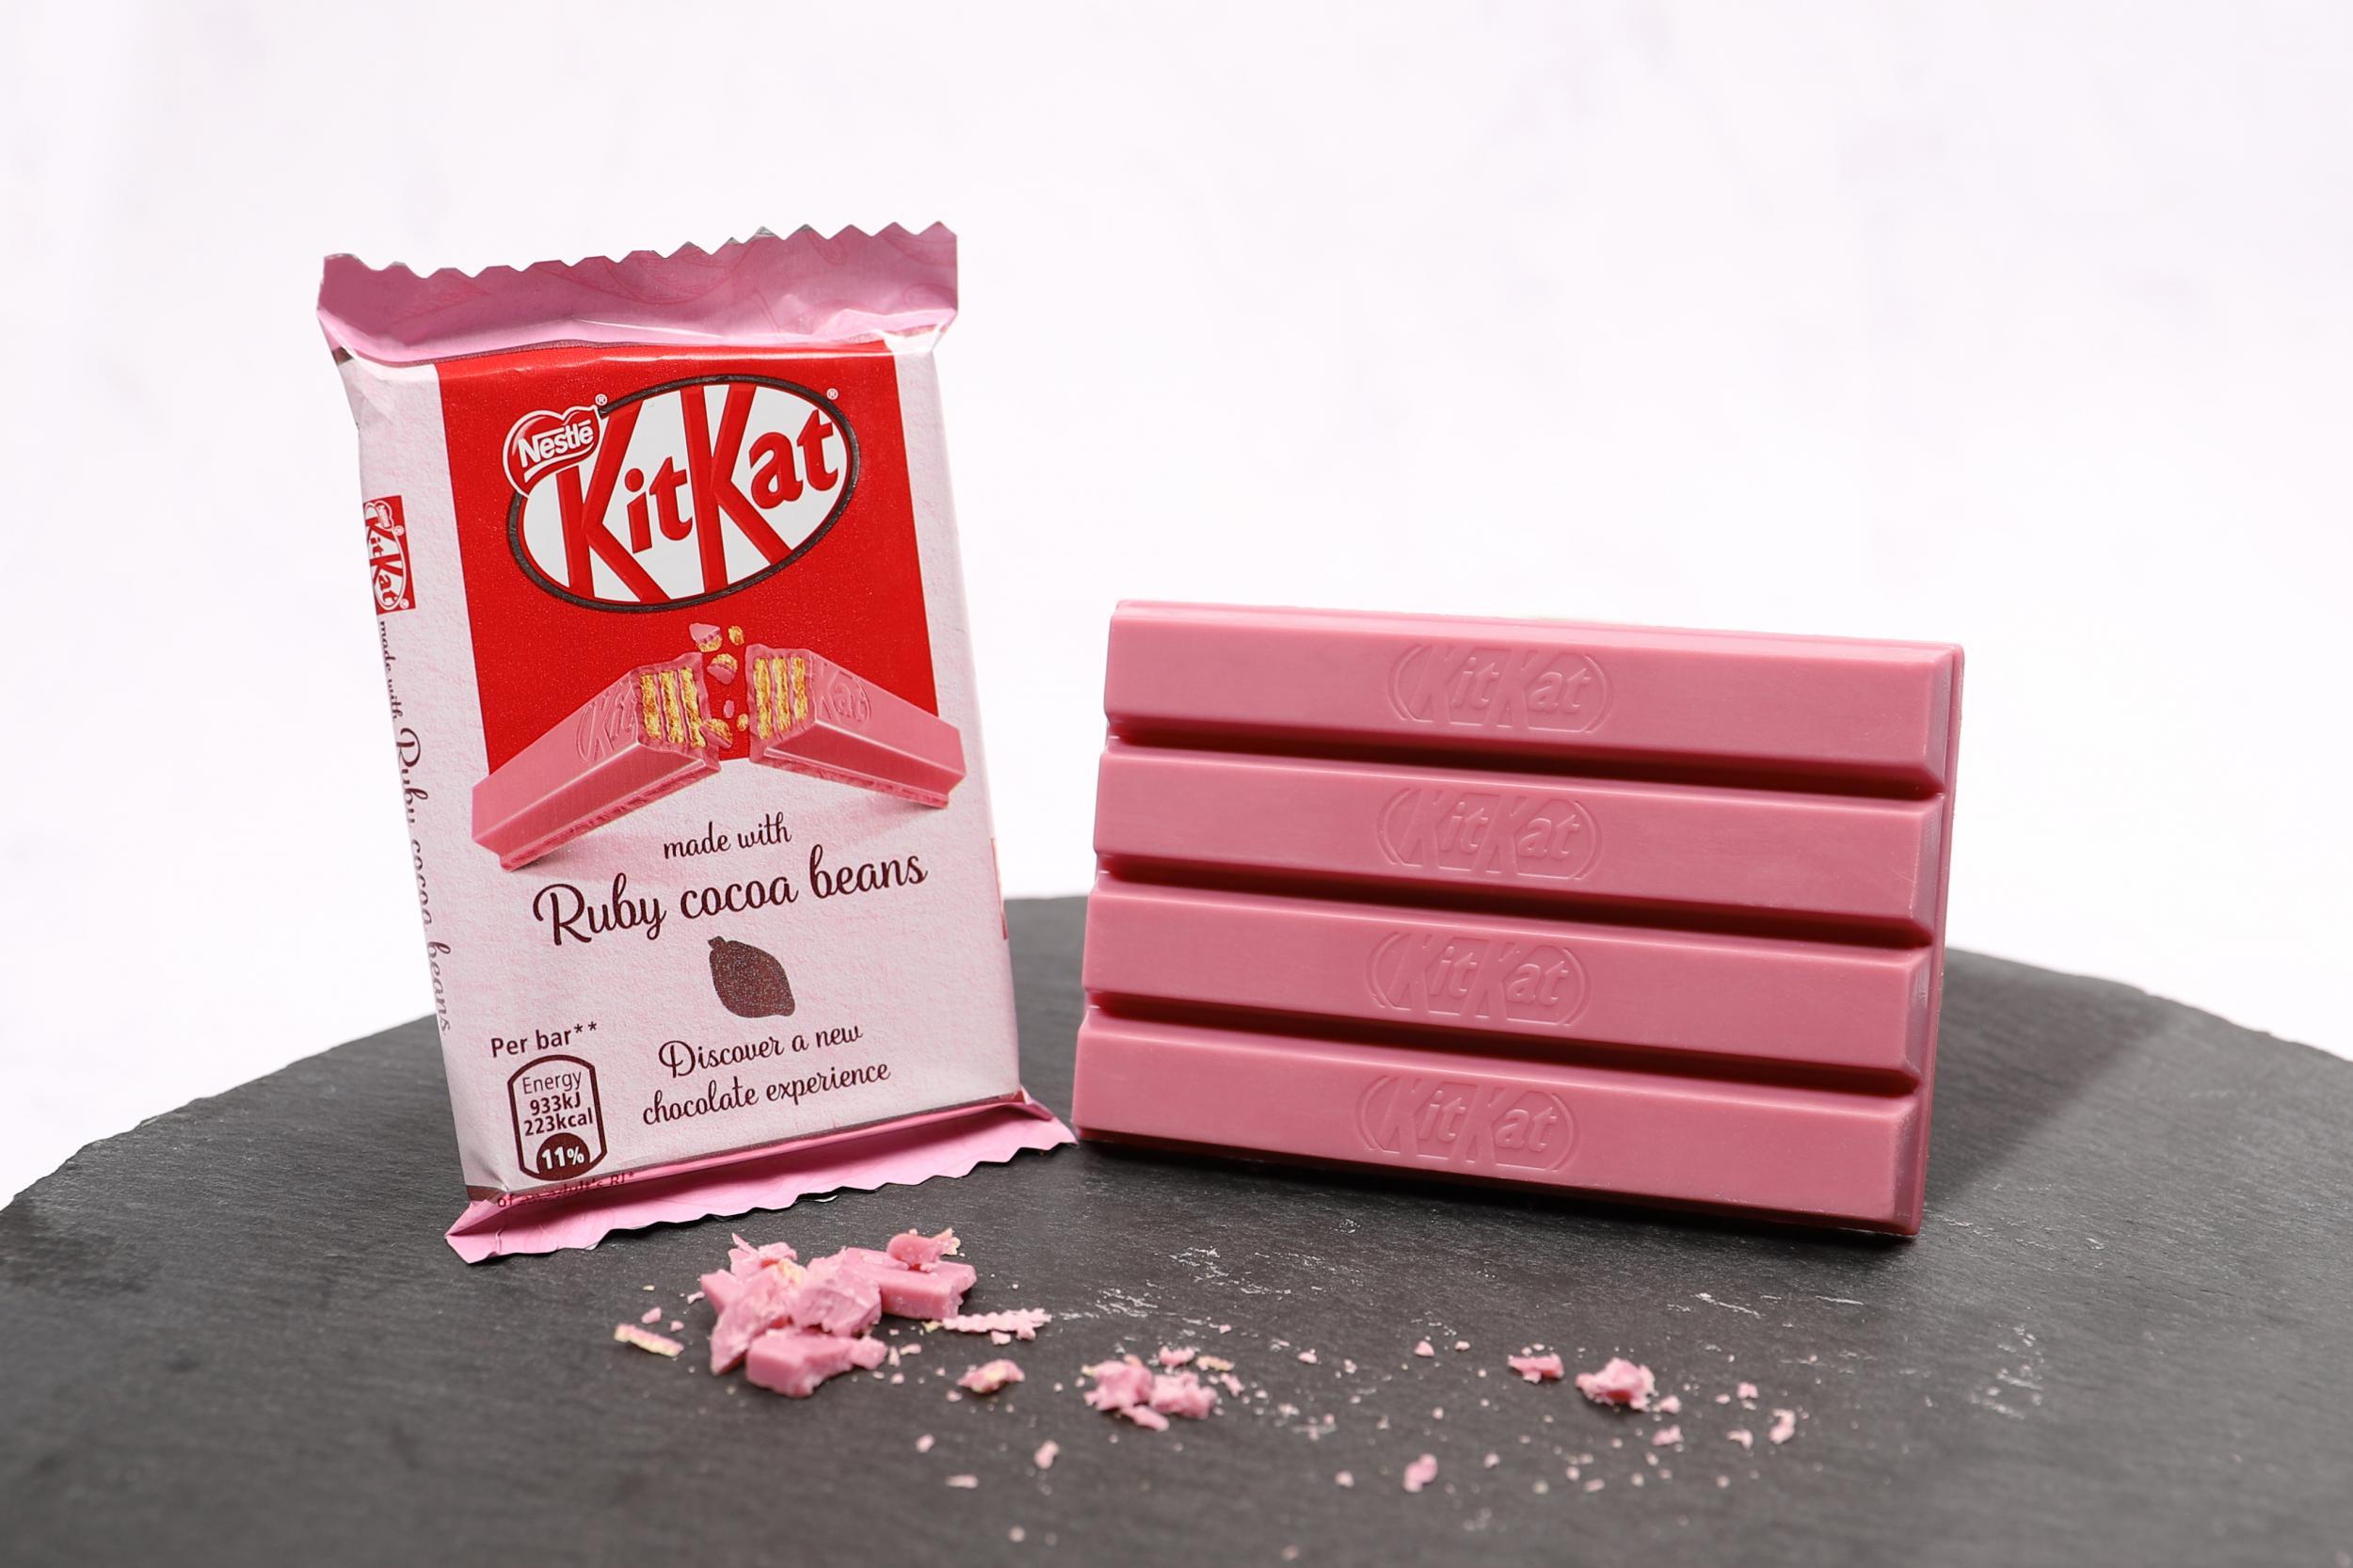 Nestle's pink KitKat four-finger chocolate bar made with ruby cocoa beans 